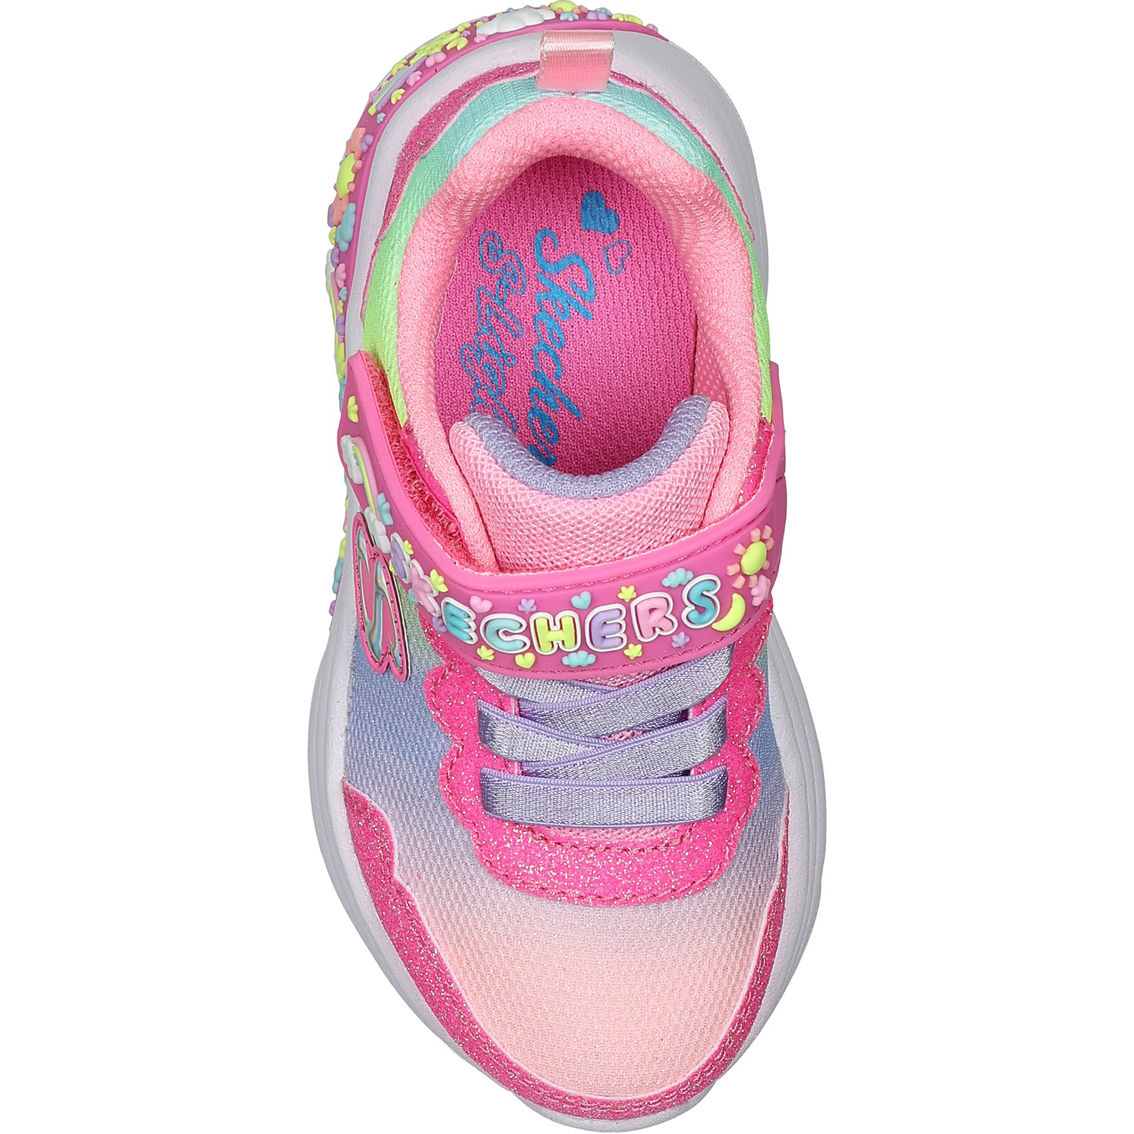 Skechers Toddler Girls My Dreamers Shoes - Image 5 of 6